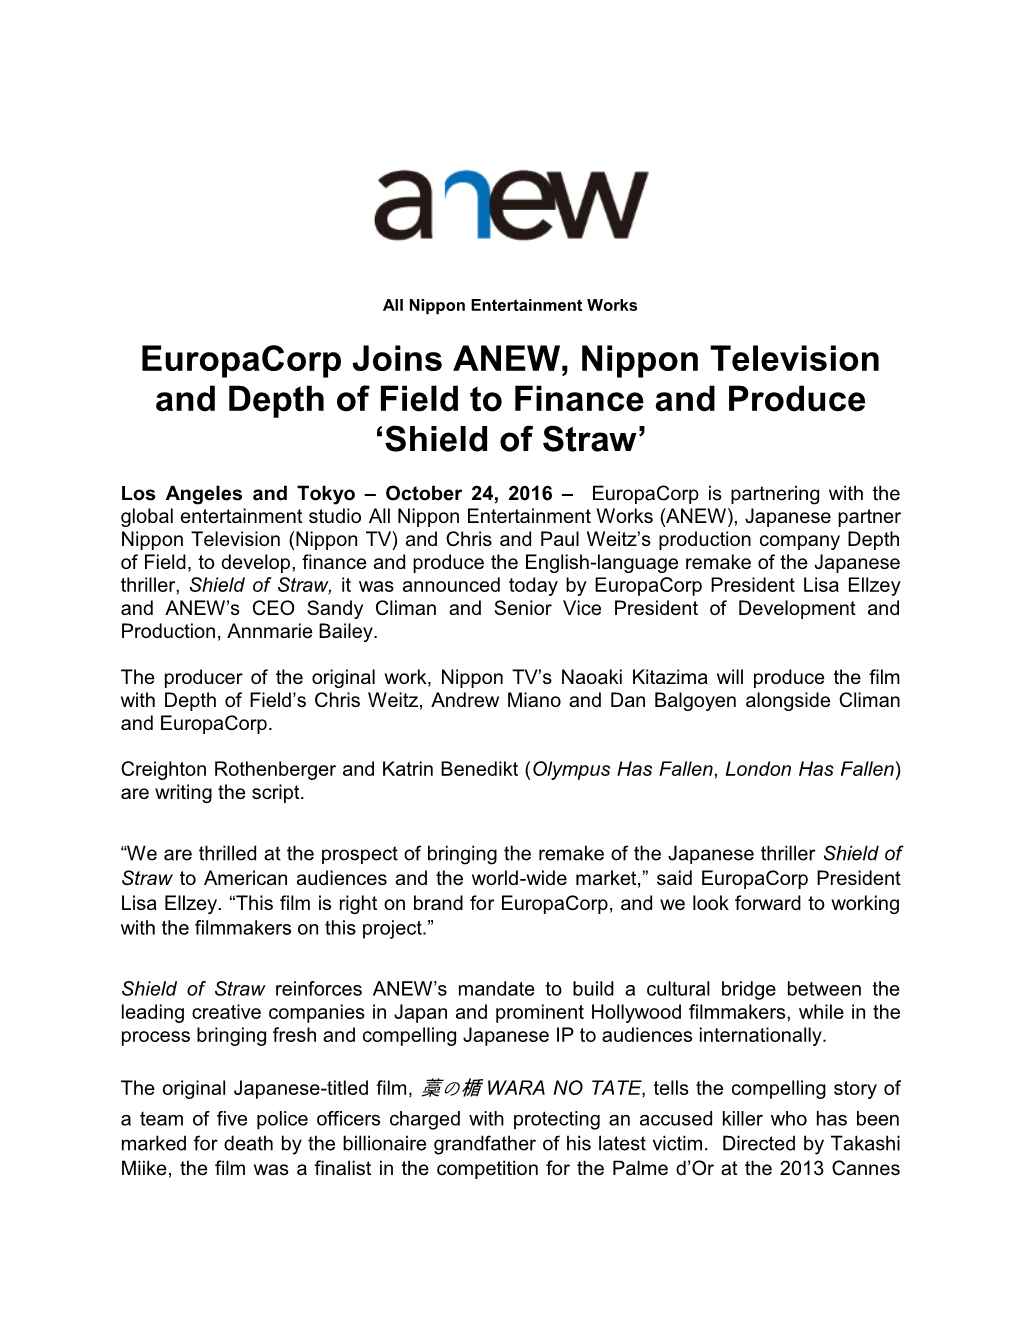 Europacorp Joins ANEW, Nippon Television and Depth of Field to Finance and Produce ‘Shield of Straw’